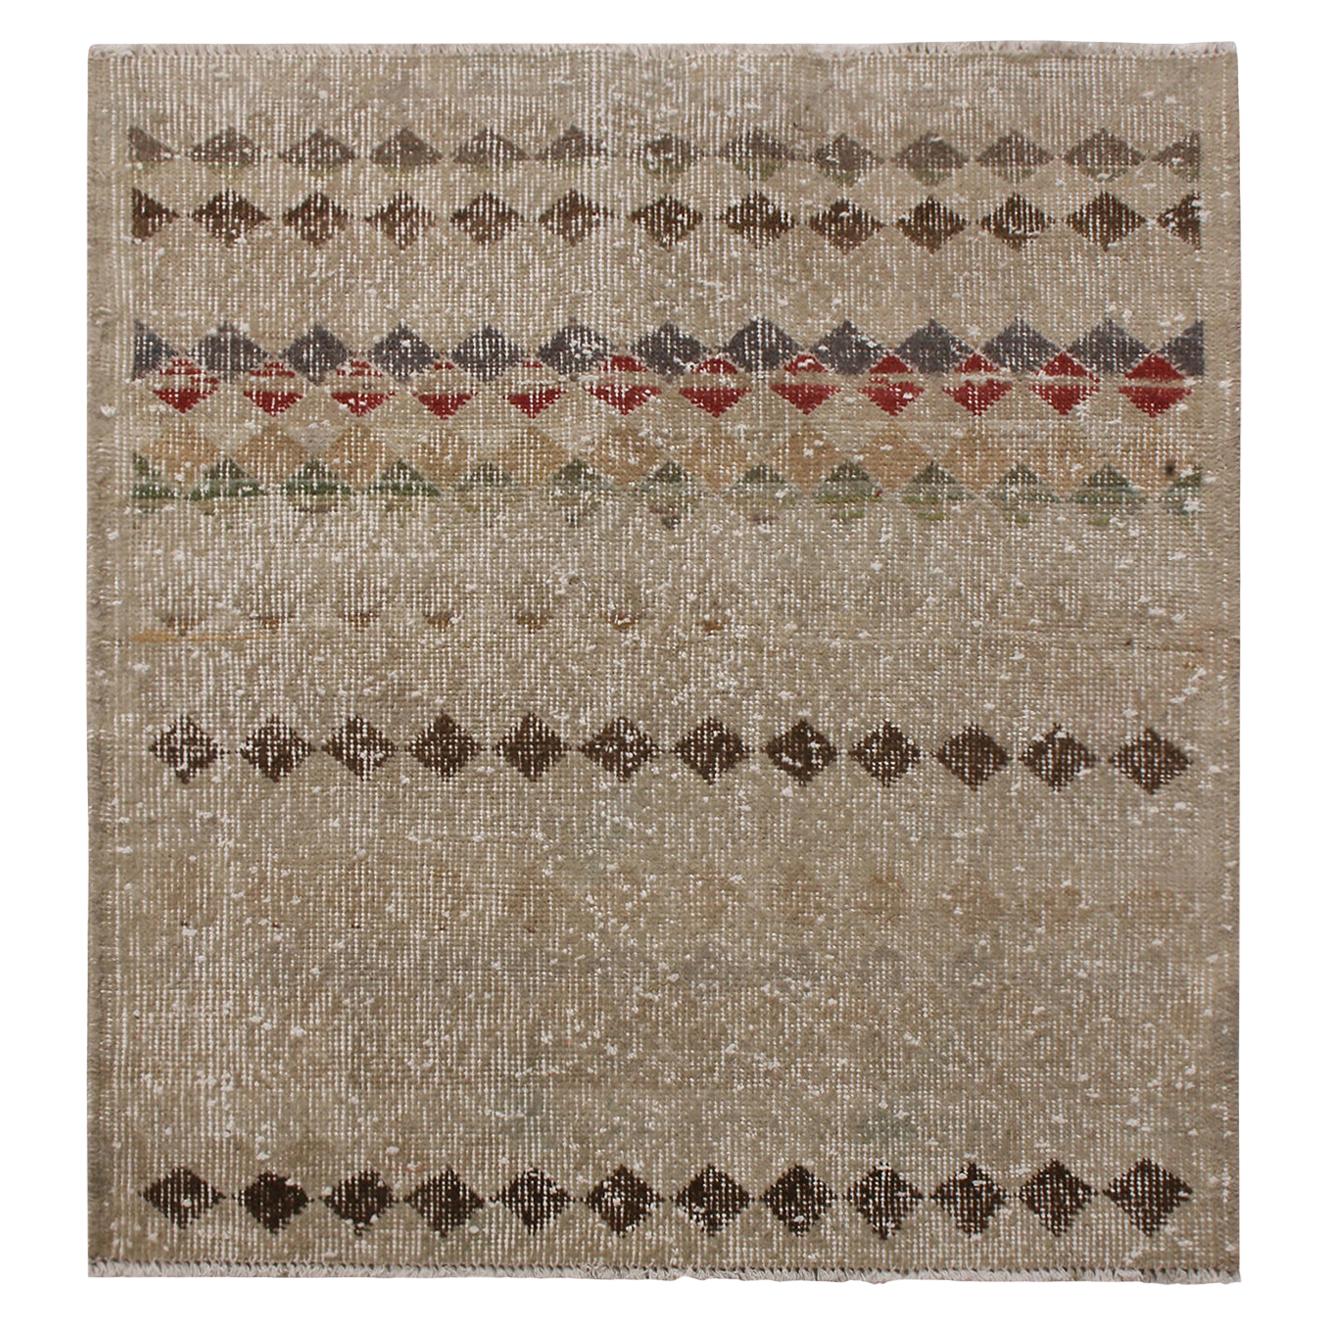 Vintage Midcentury Khaki Brown Wool Rug with Lively Accents